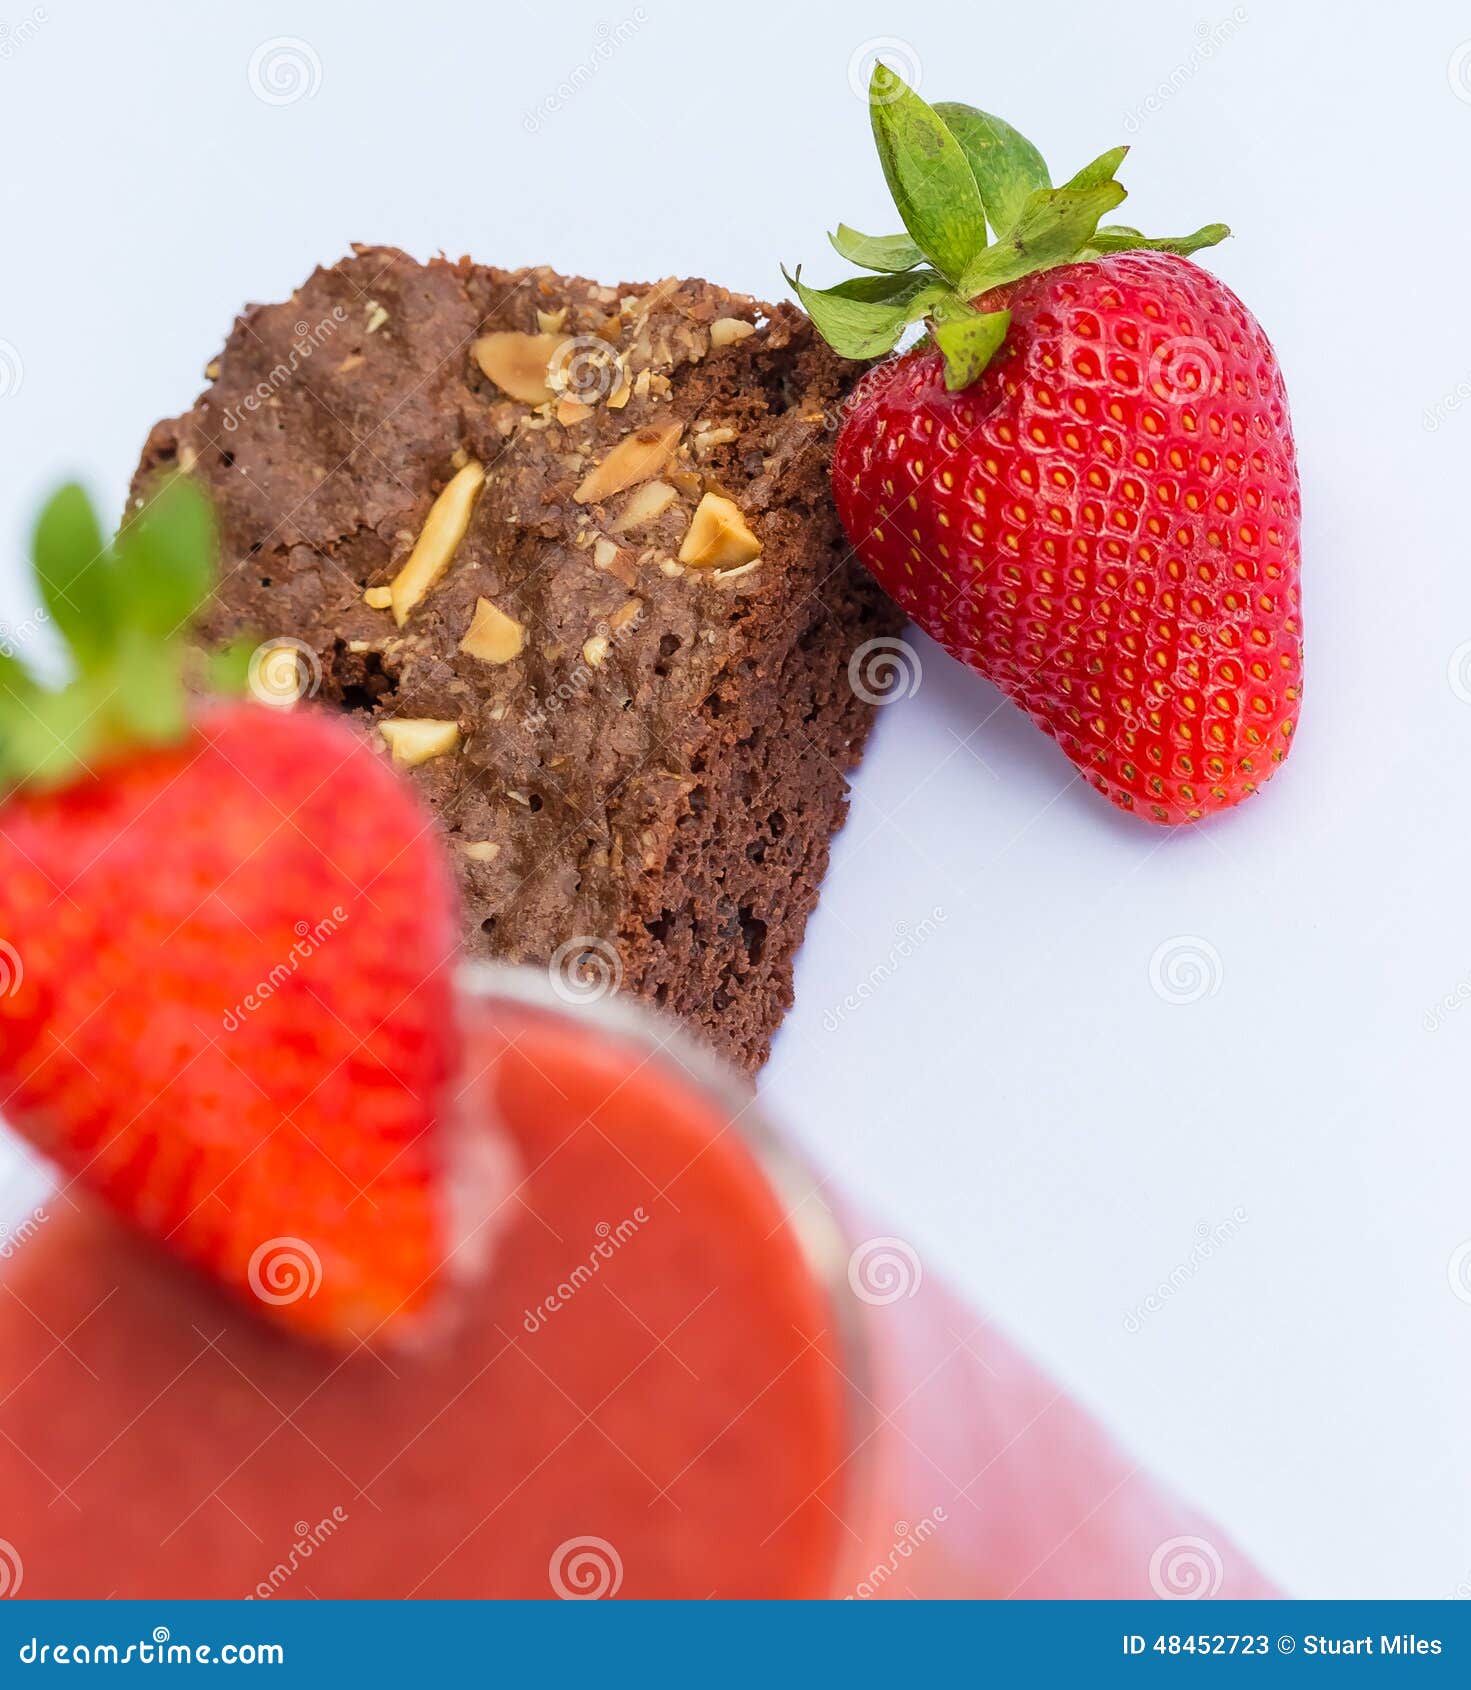 strawberries and brownie indicates juicy afters and fruity